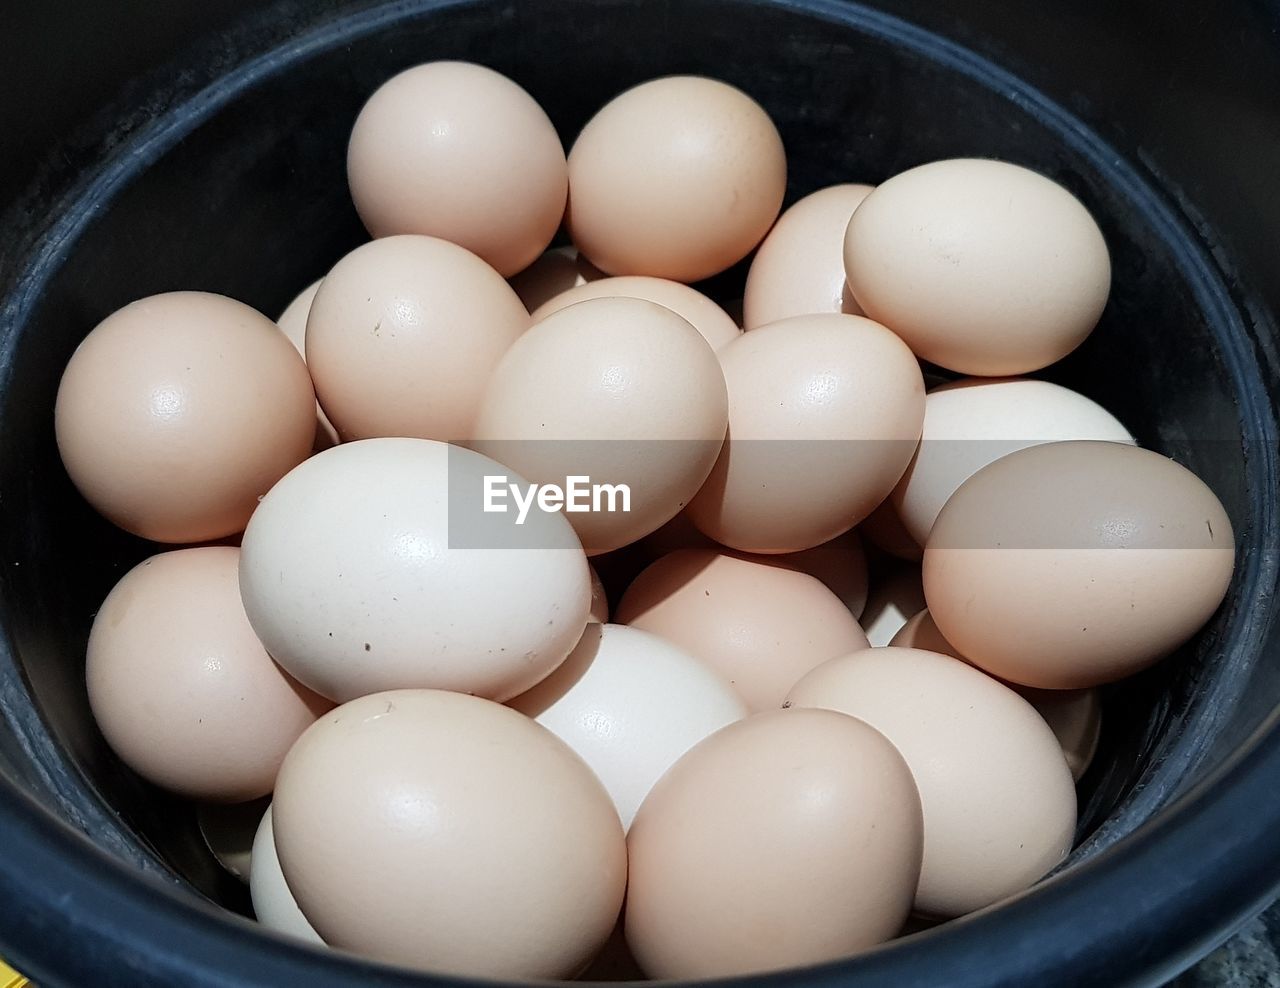 CLOSE-UP HIGH ANGLE VIEW OF EGGS IN CONTAINER